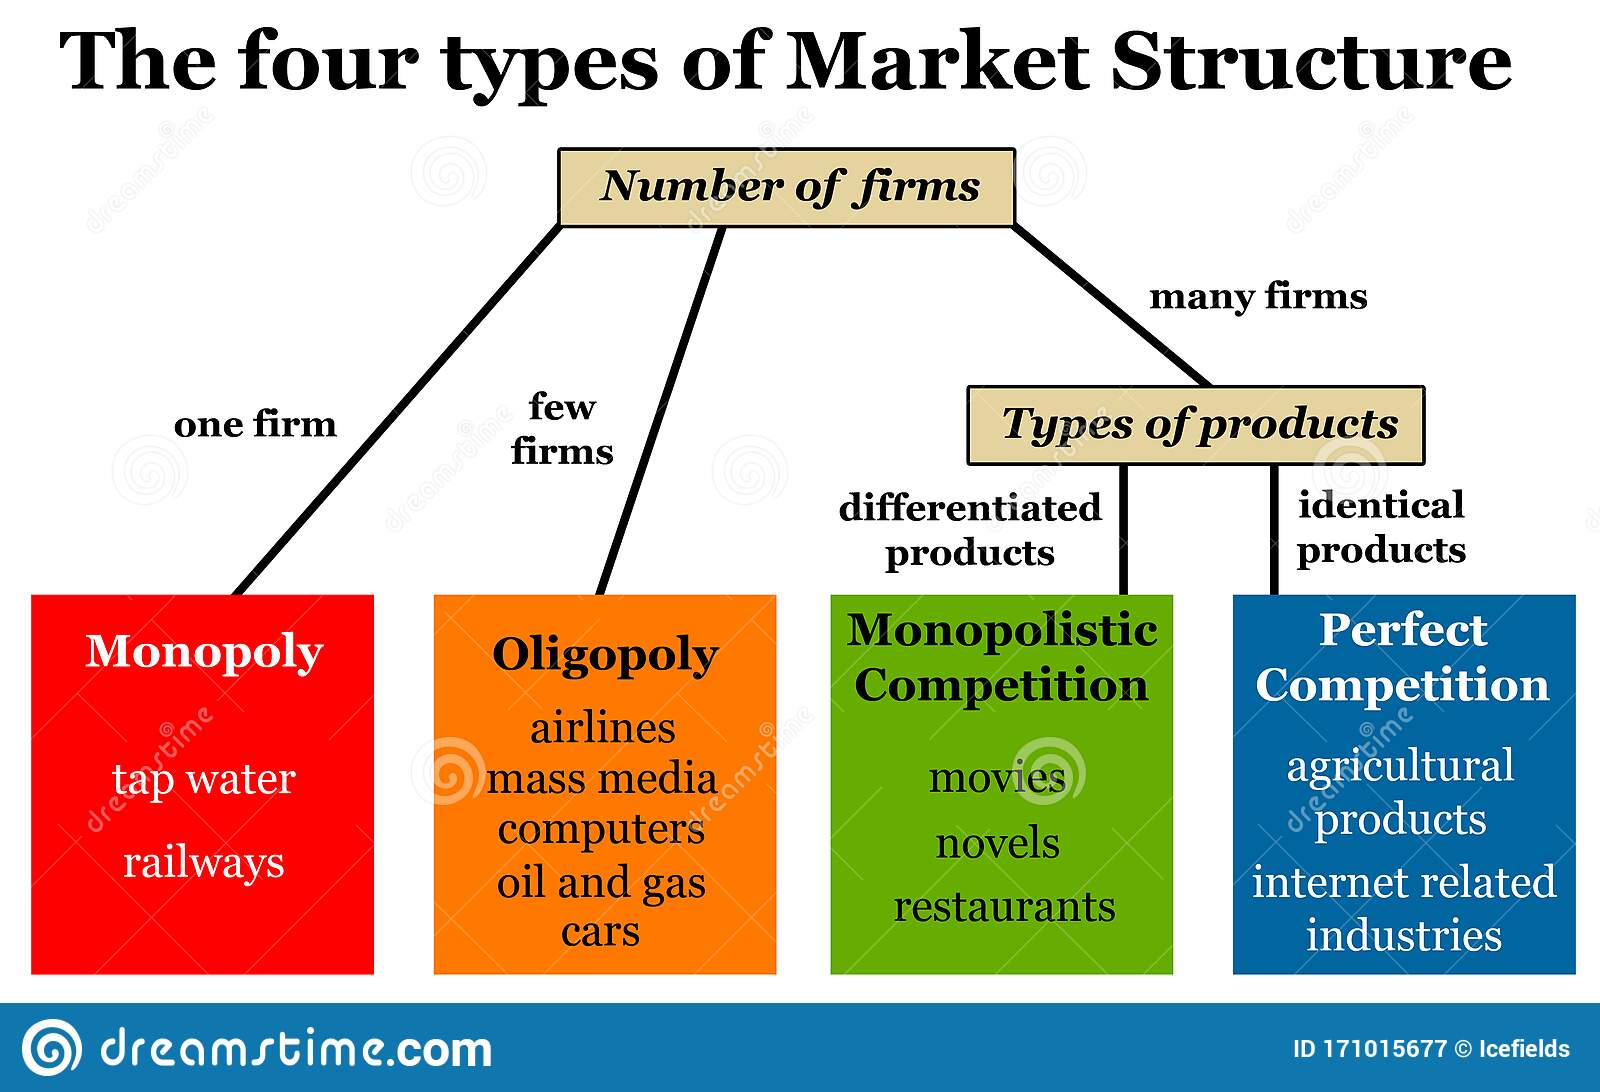 what are the main types of market structure